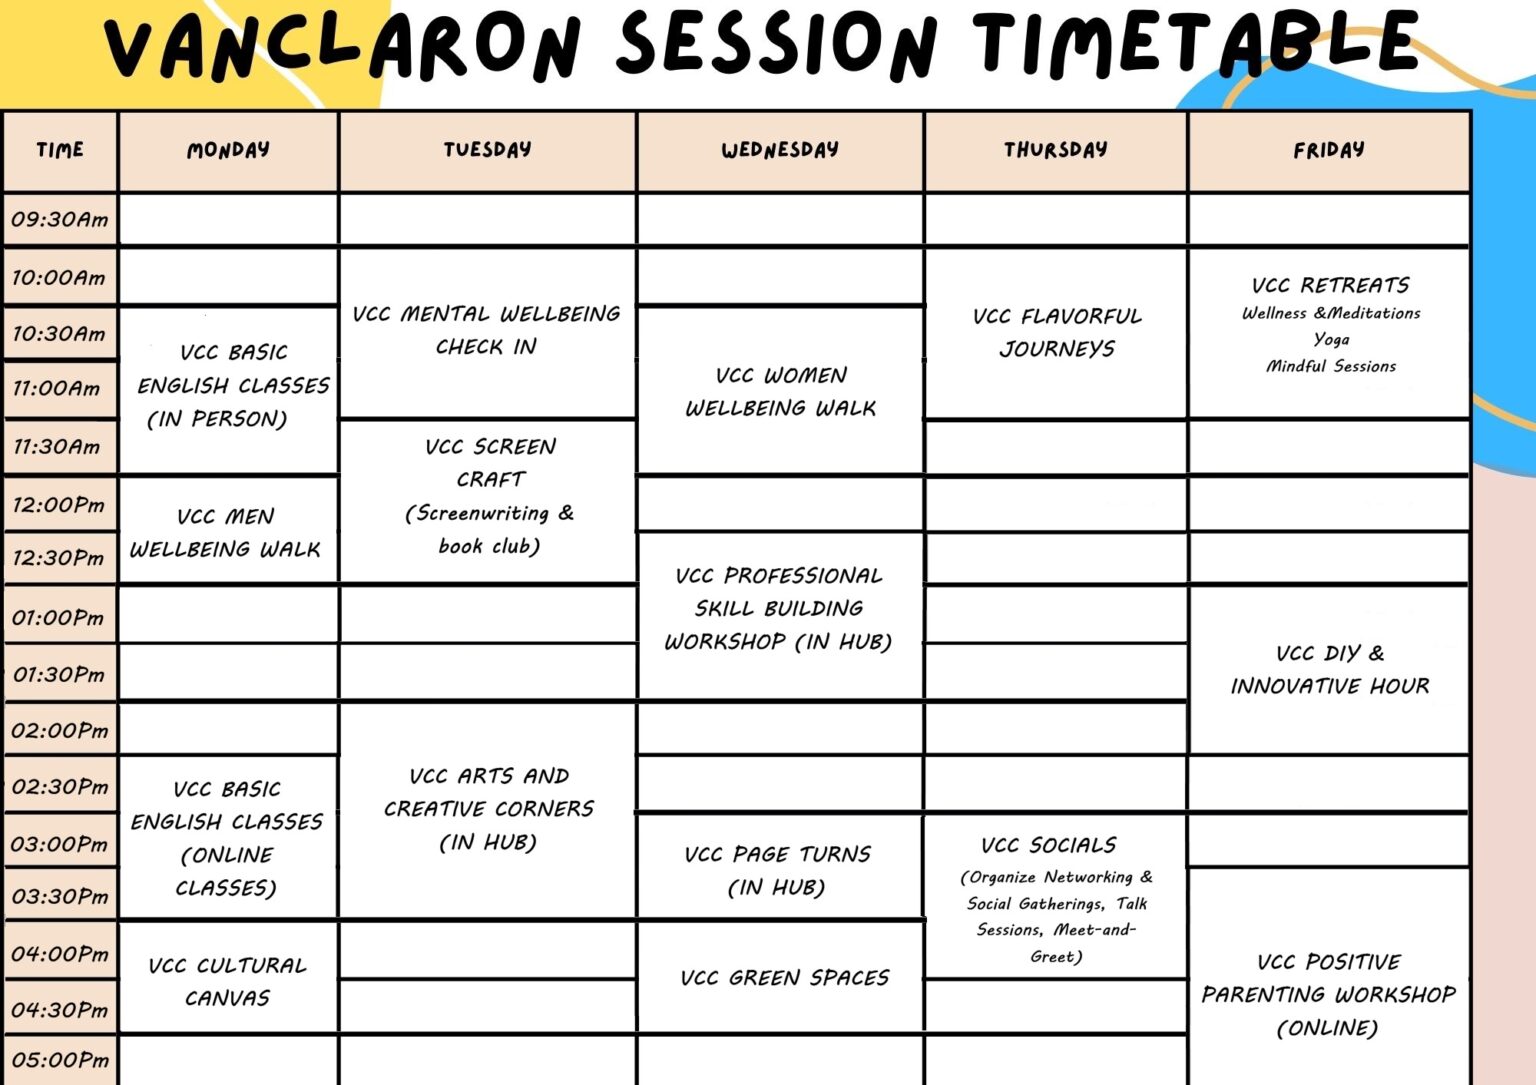 UPDATED TIMETABLE